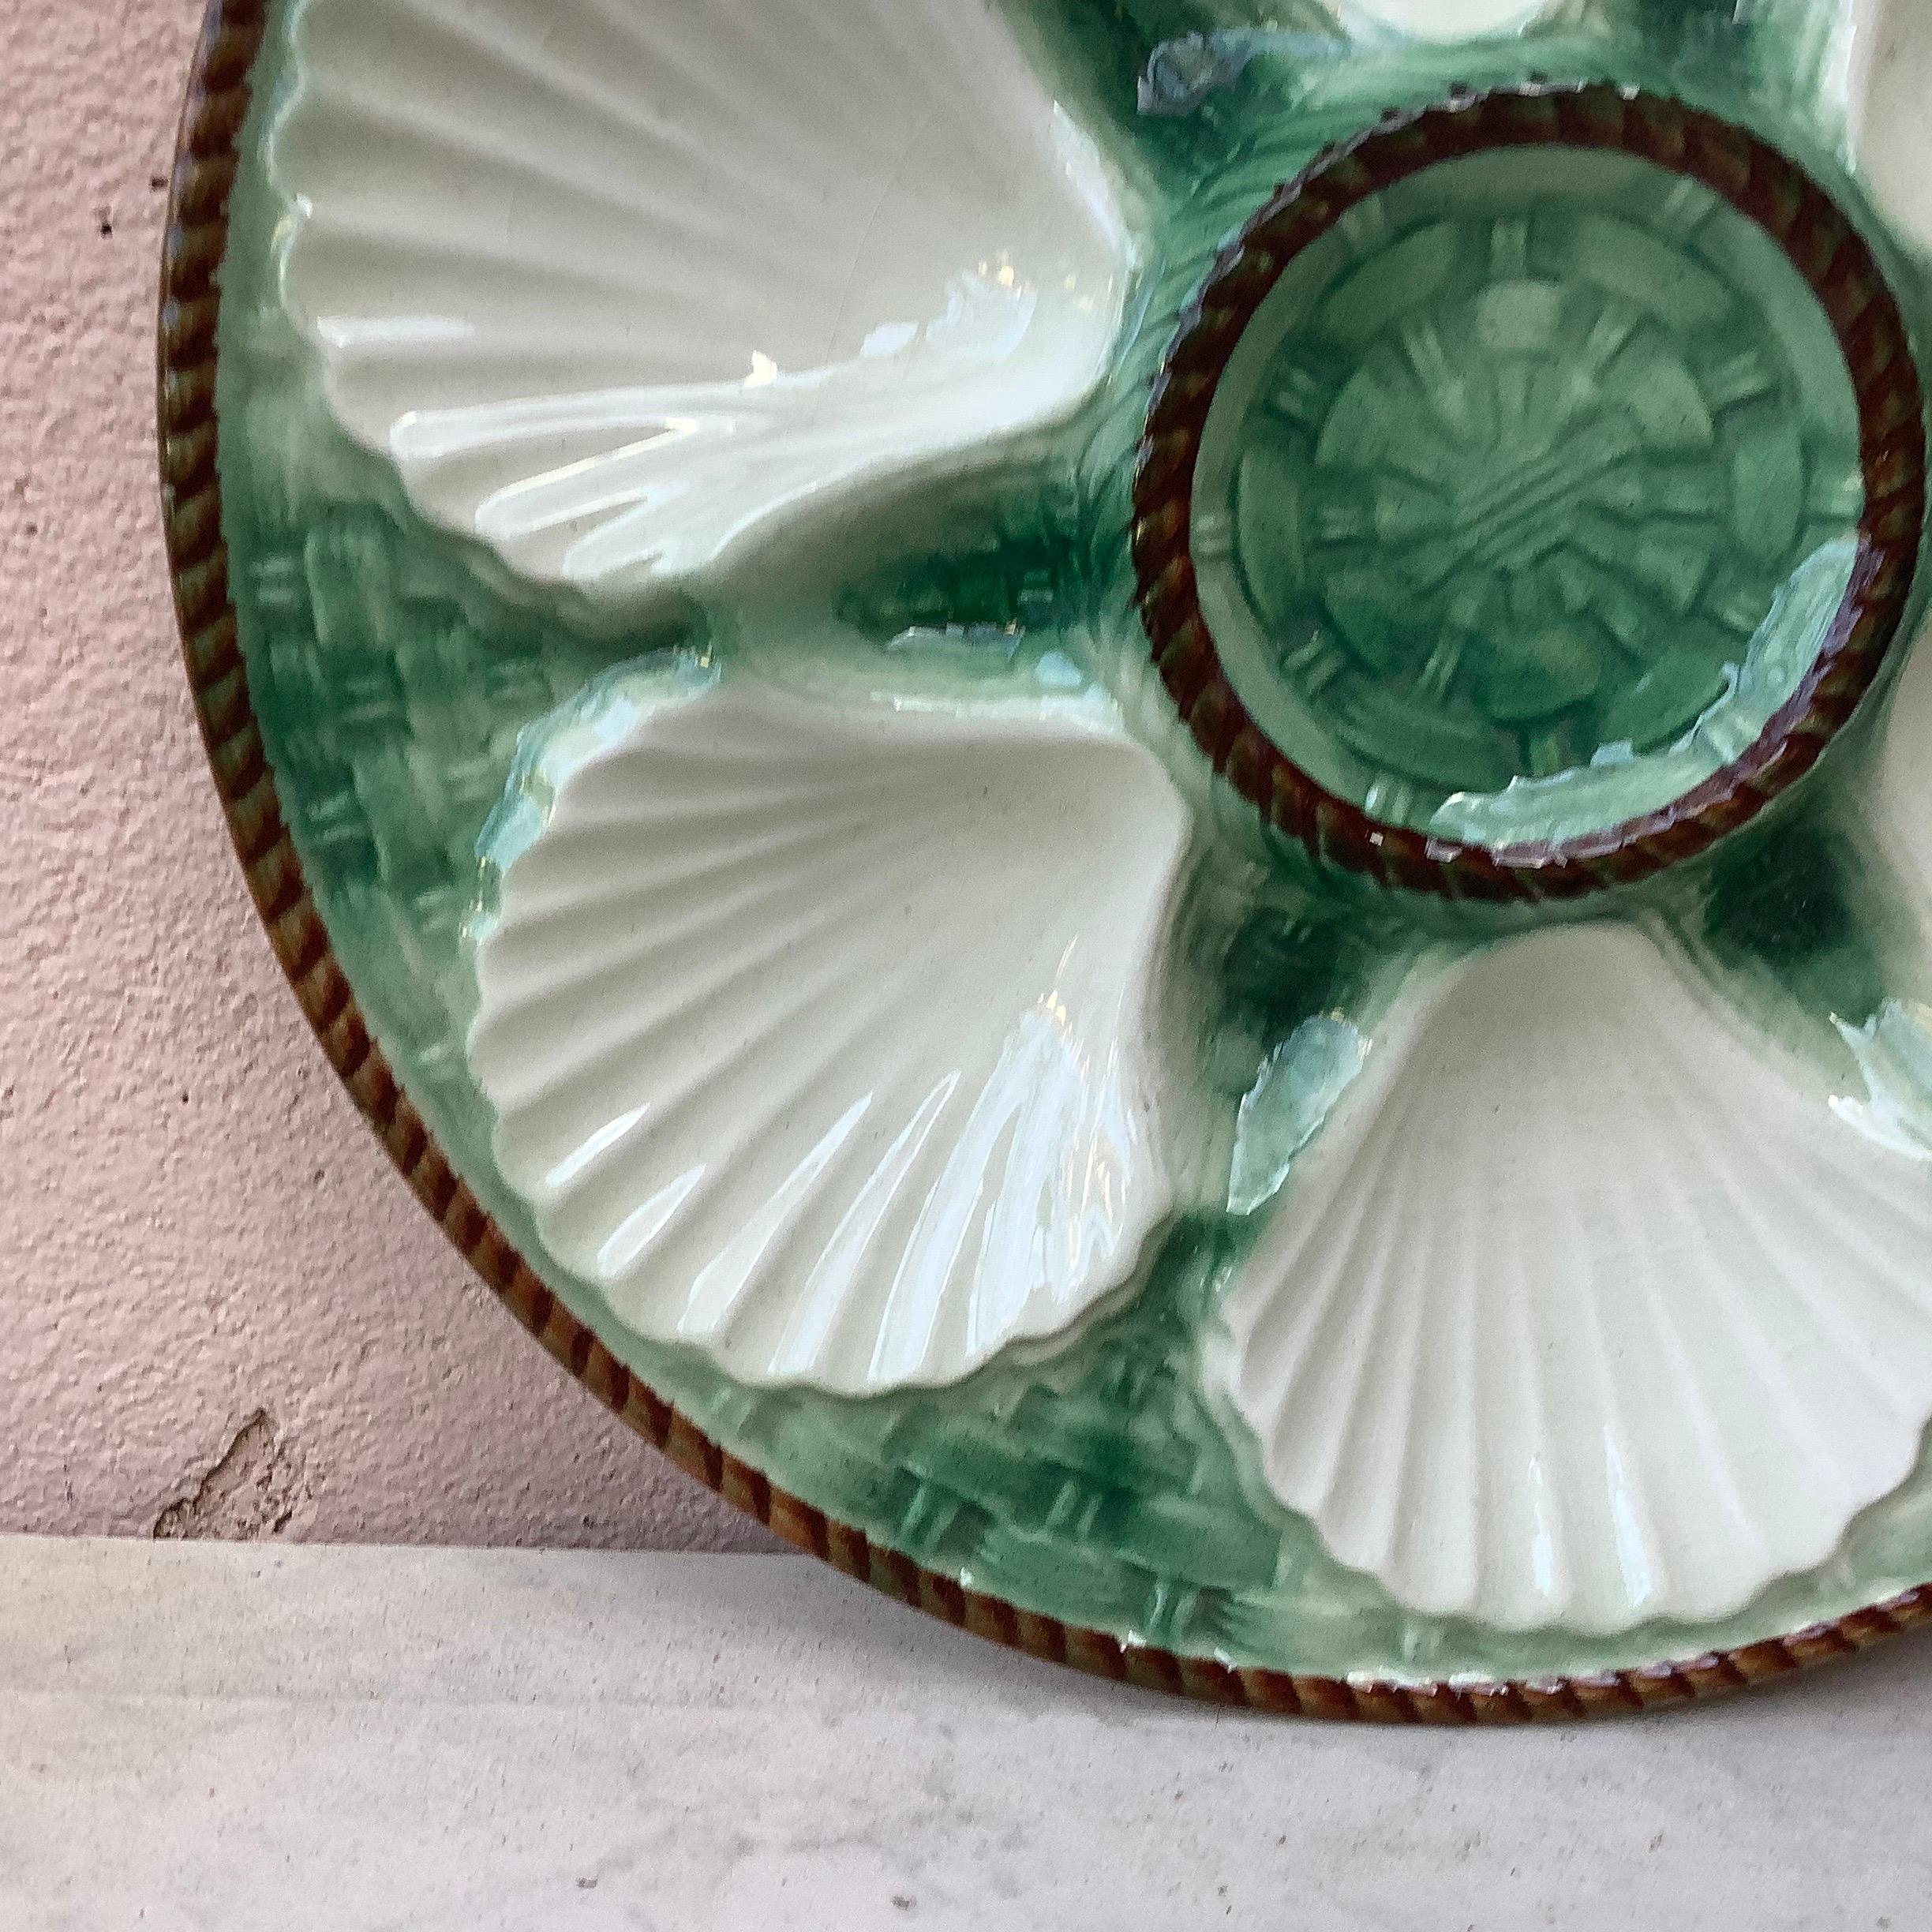 Majolica oyster plate Longchamp, circa 1930.
11 plates available.